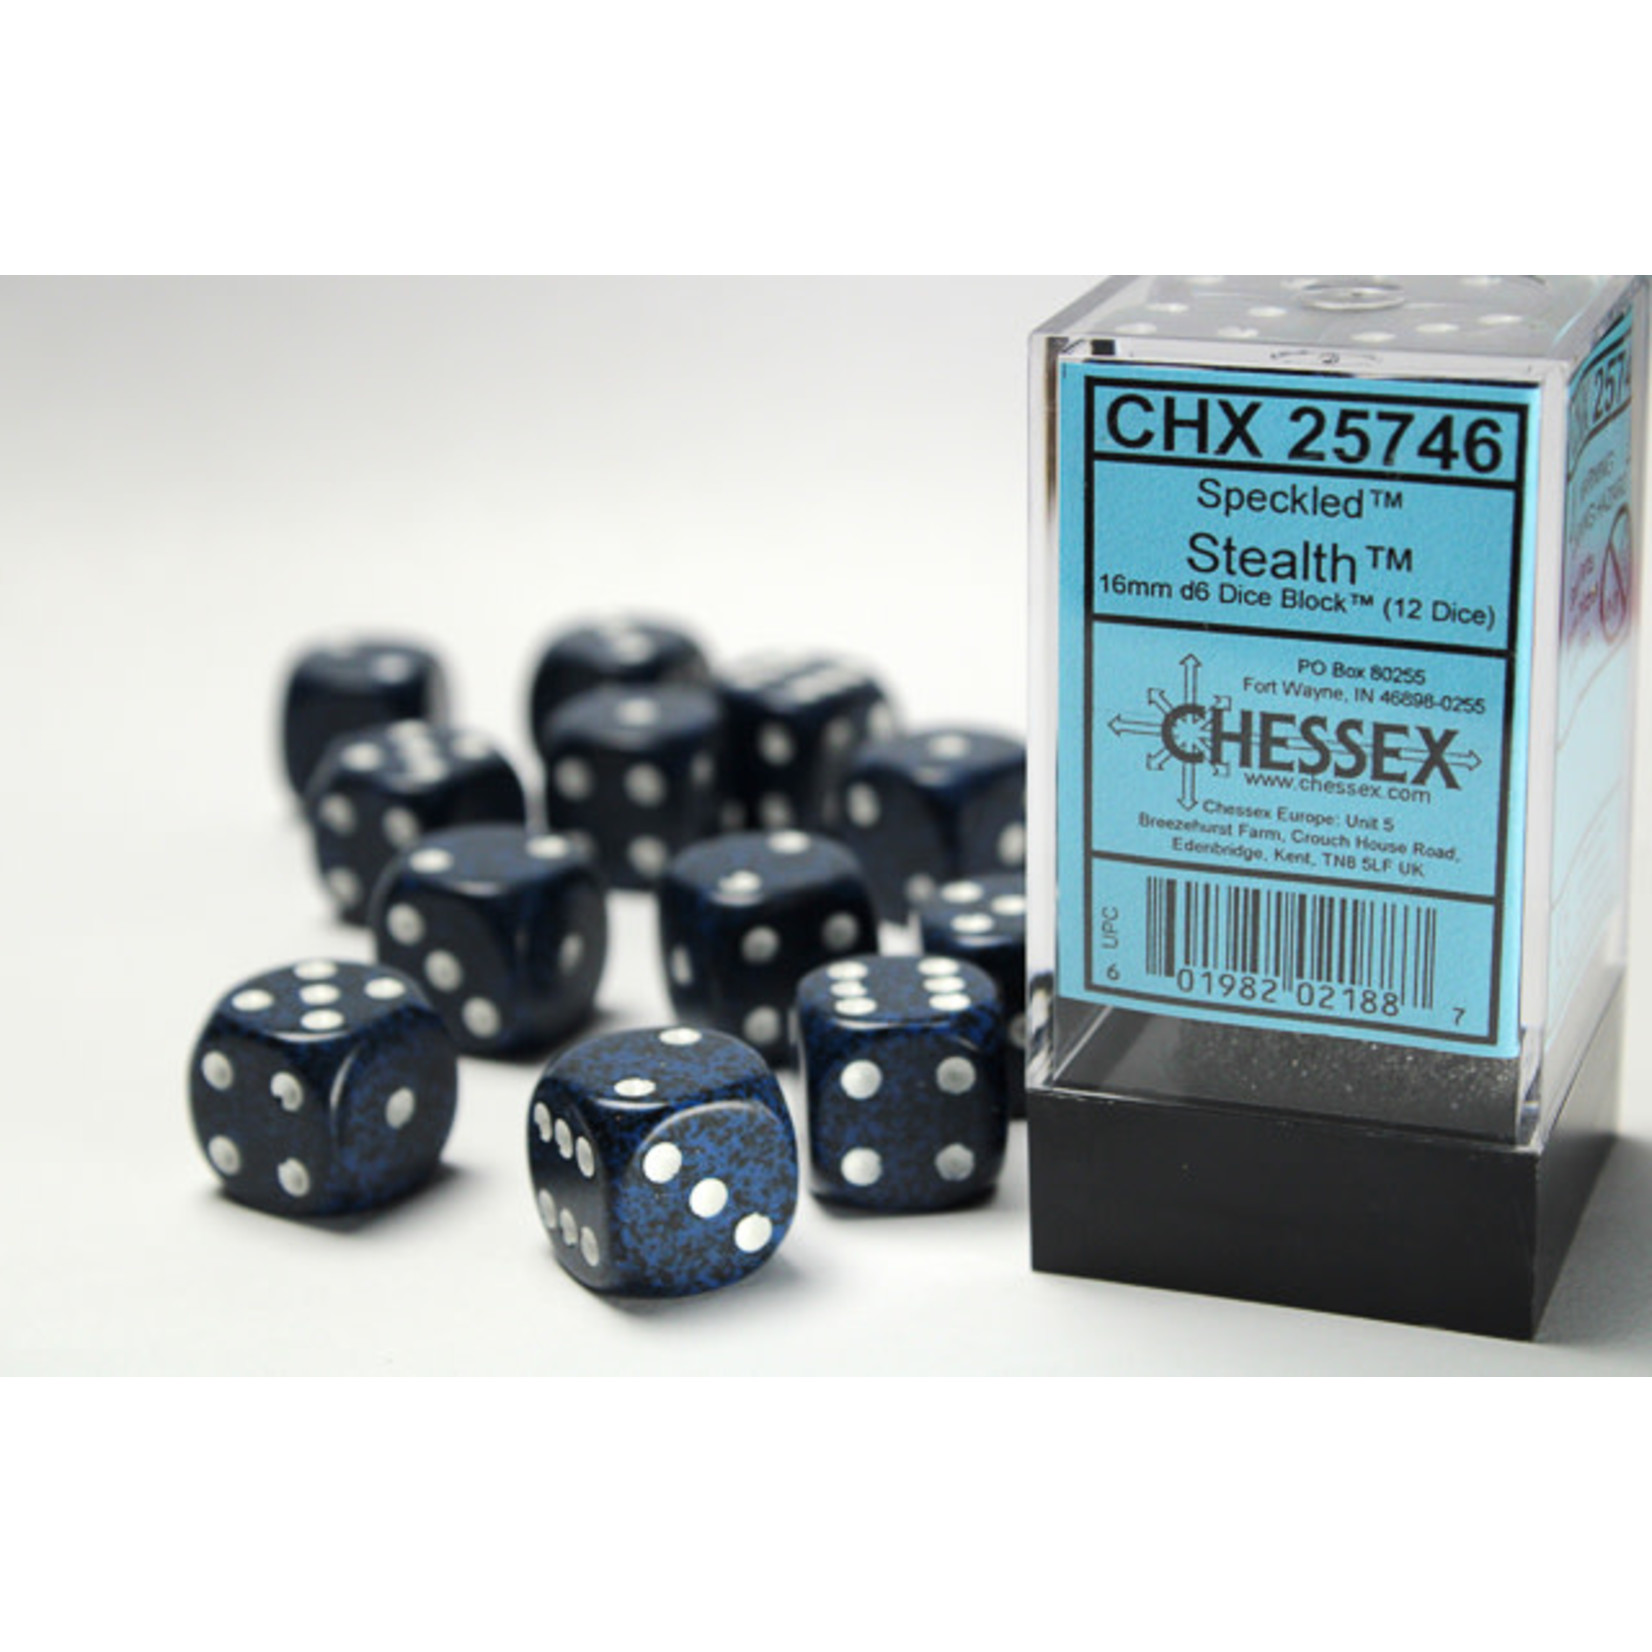 Chessex Dice 16mm 25746 12pc Speckled Stealth